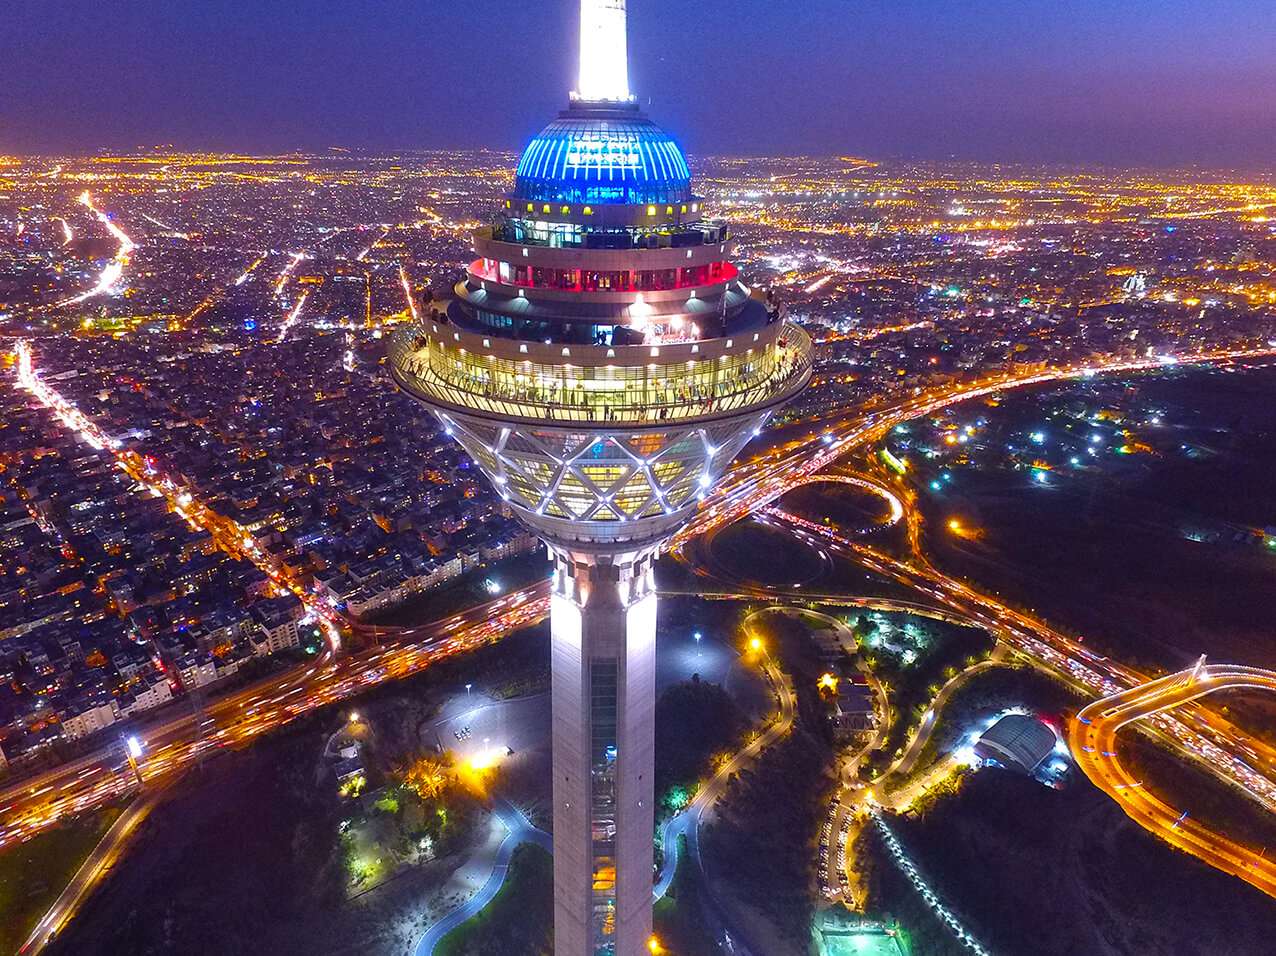 Milad Tower Iranroute